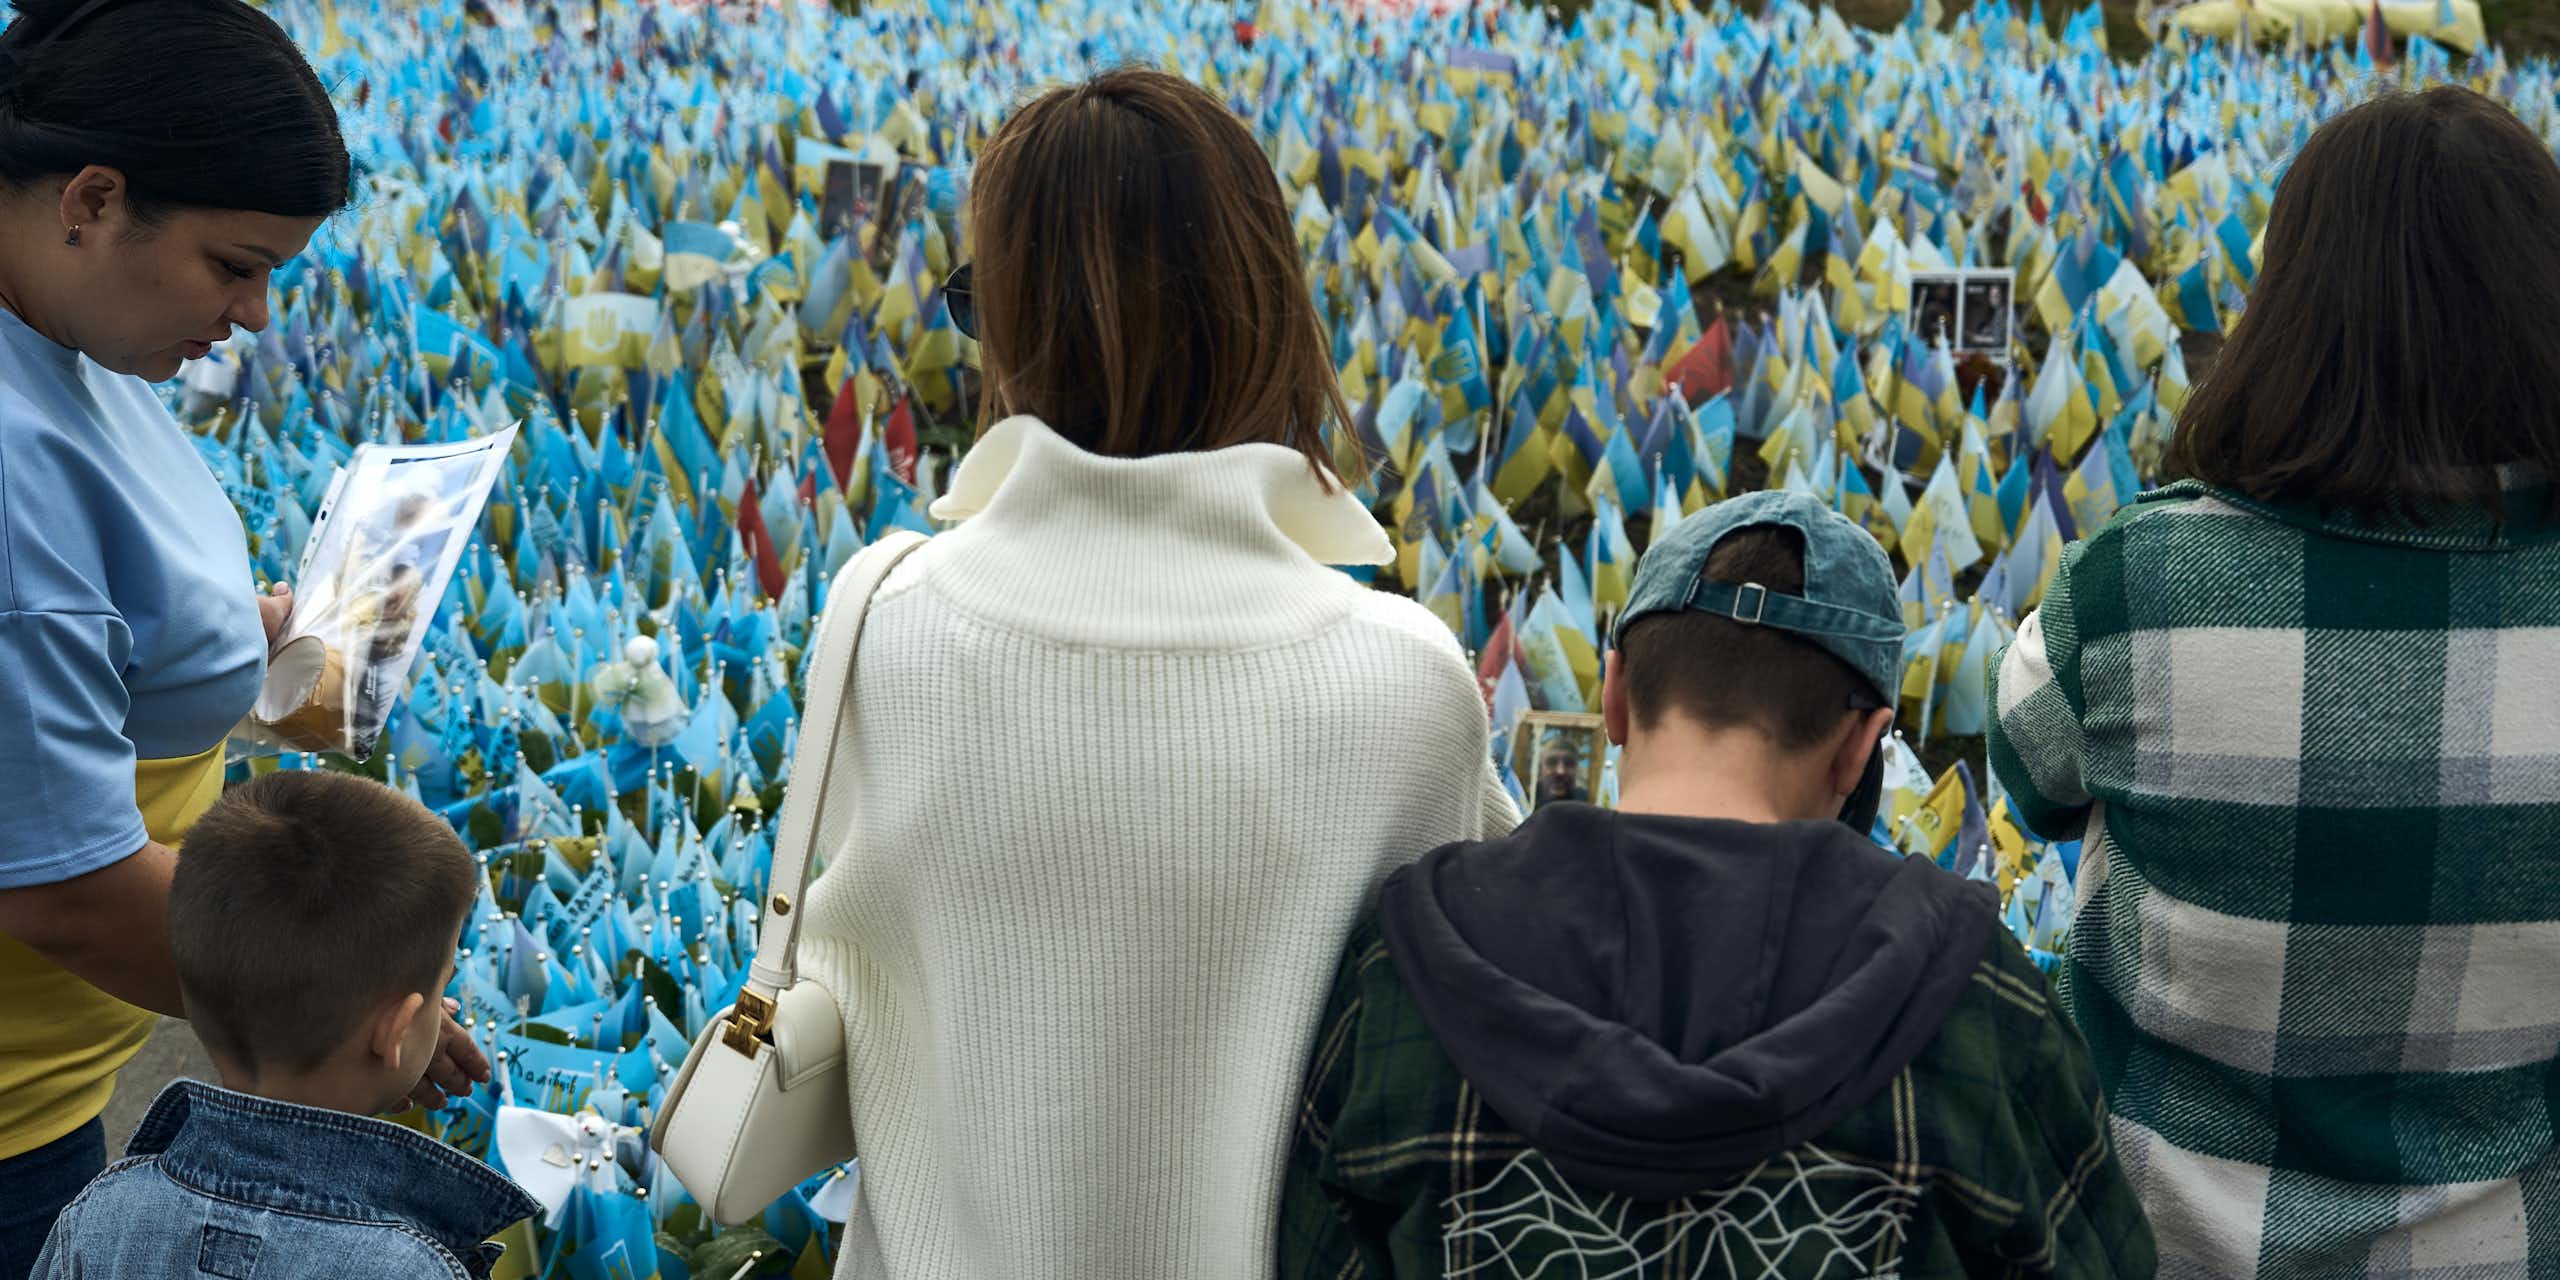 Women and children stand looking at blue and yellow flags.